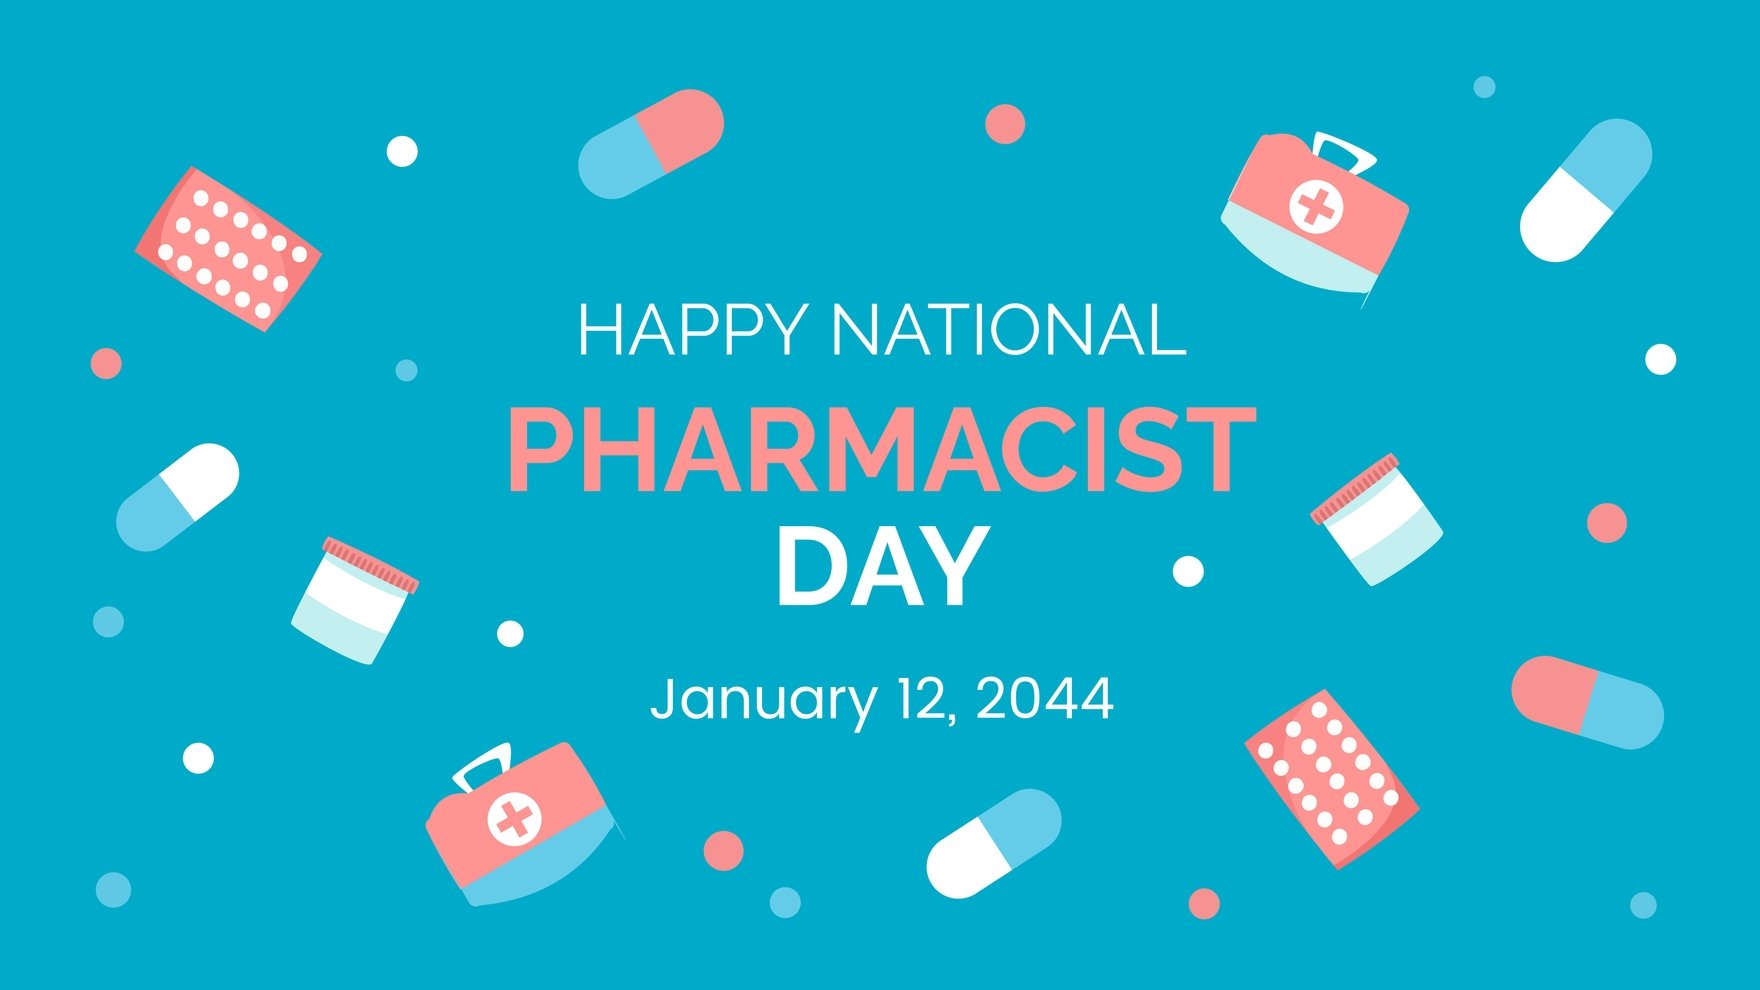 Free National Pharmacist Day Wishes Background in PDF, Illustrator, PSD, EPS, SVG, PNG, JPEG